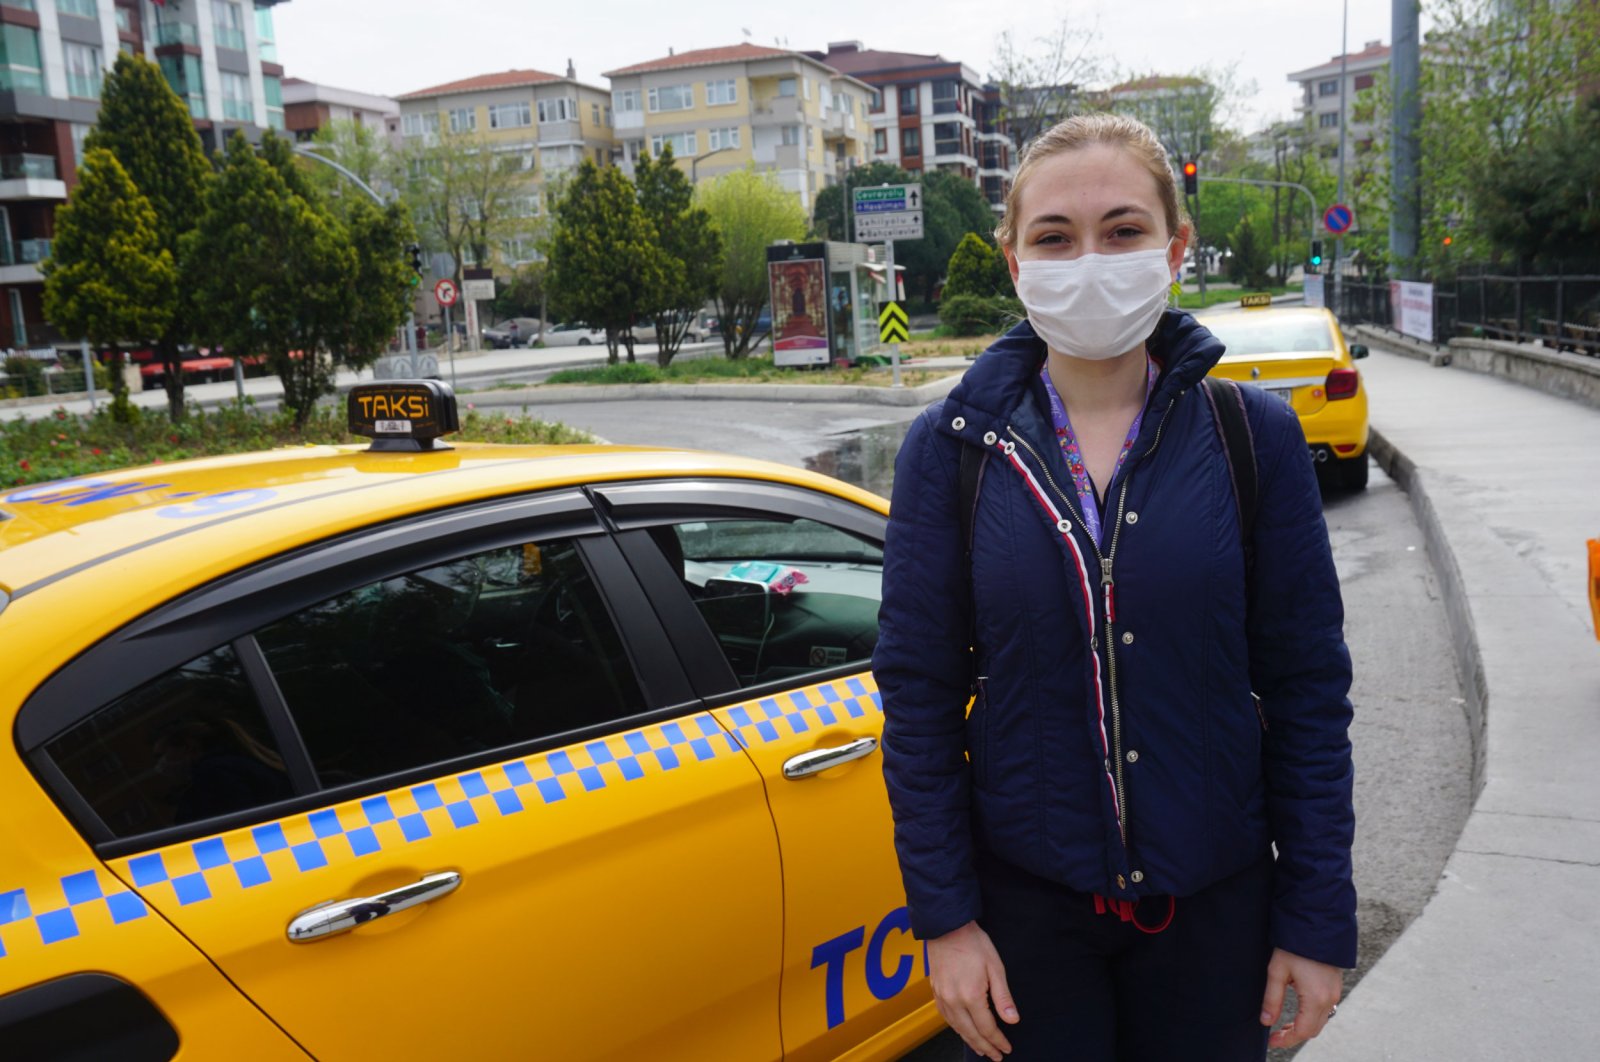 Naz Alibaşoğlu, a health worker that had finished her shift and benefitted from the taxi service, expresses her admiration of the practice, Istanbul, May 1, 2020. (DHA Photo)